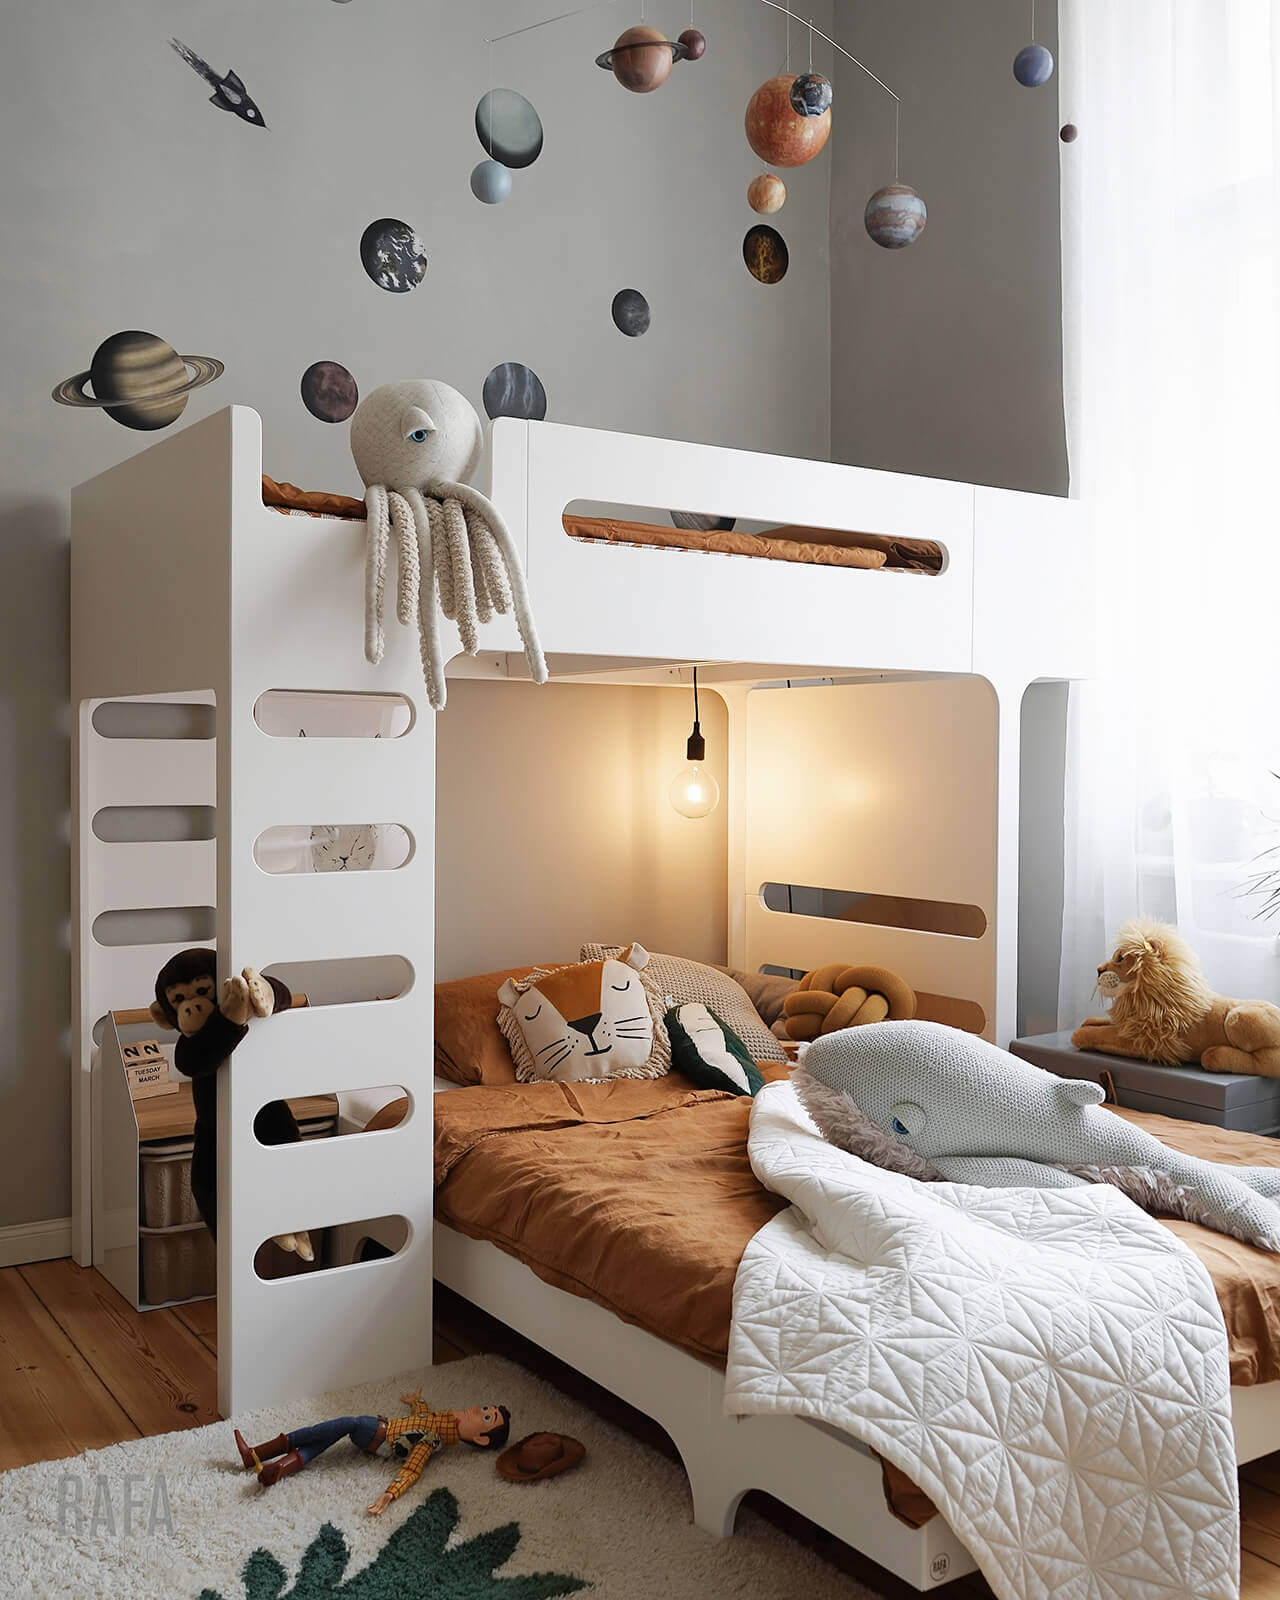 F A120 Bunk Bed For 2 Children, Bunk Bed Sets